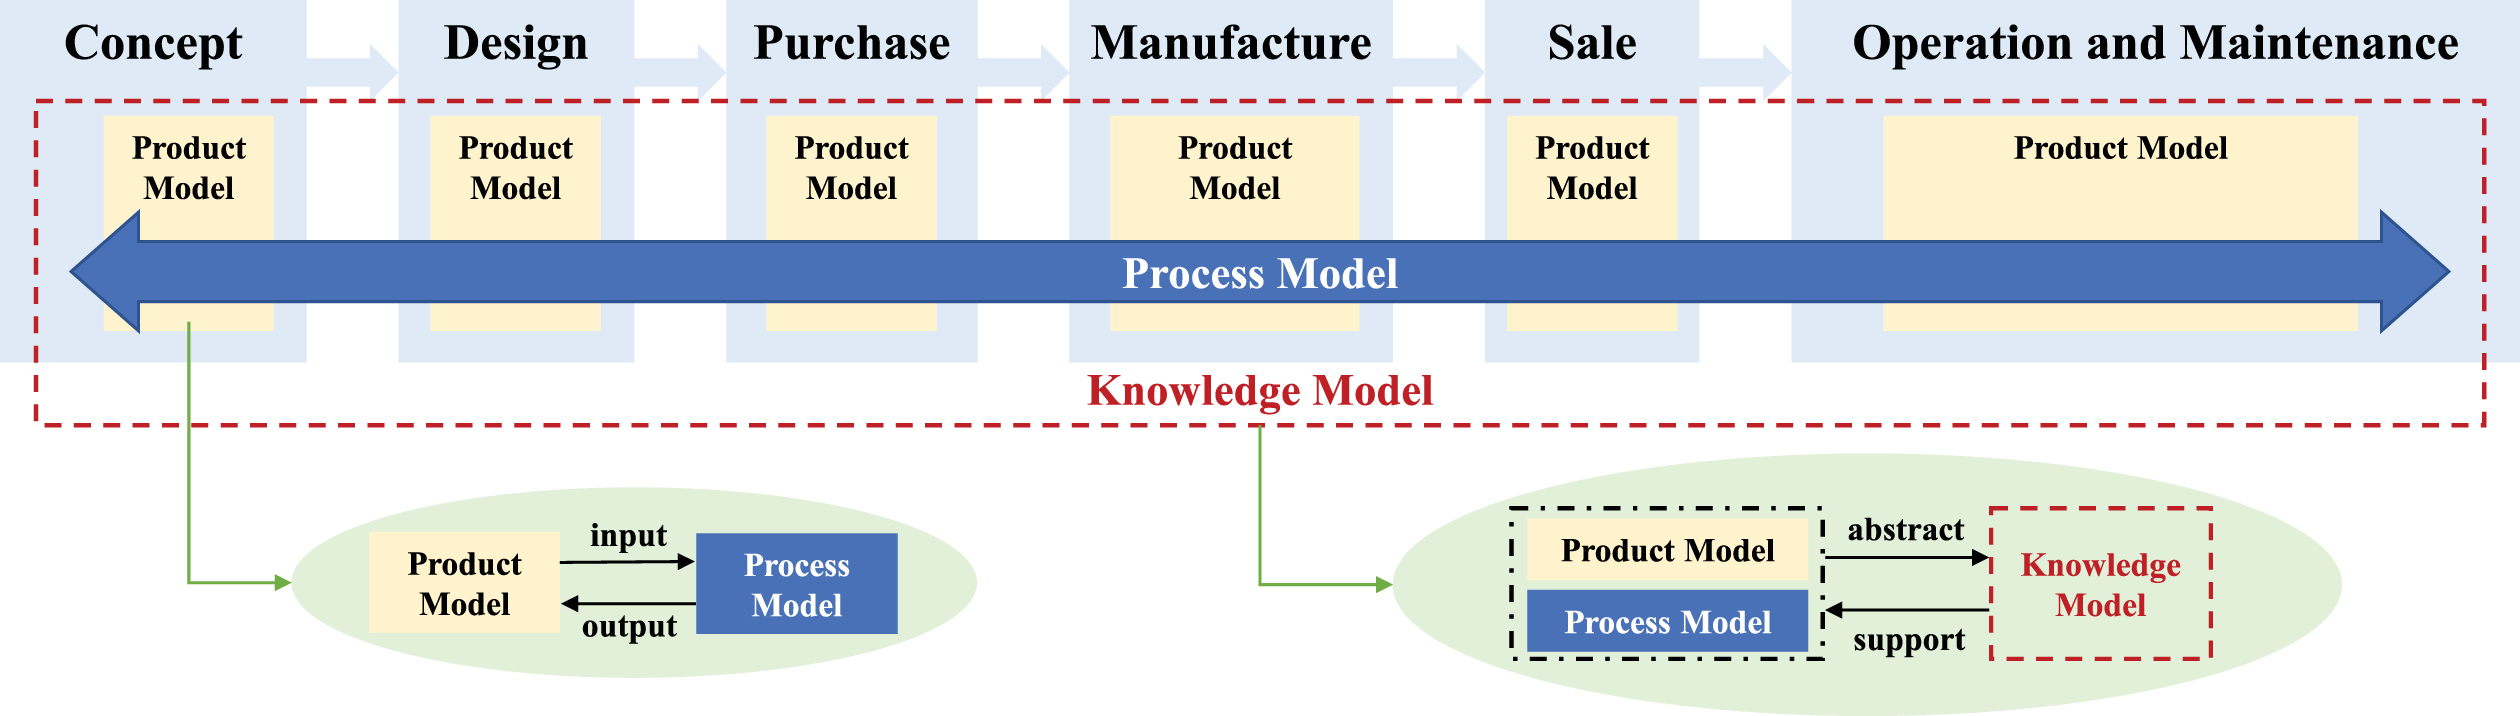 Relation of product model, process model and knowledge model in PLMM.